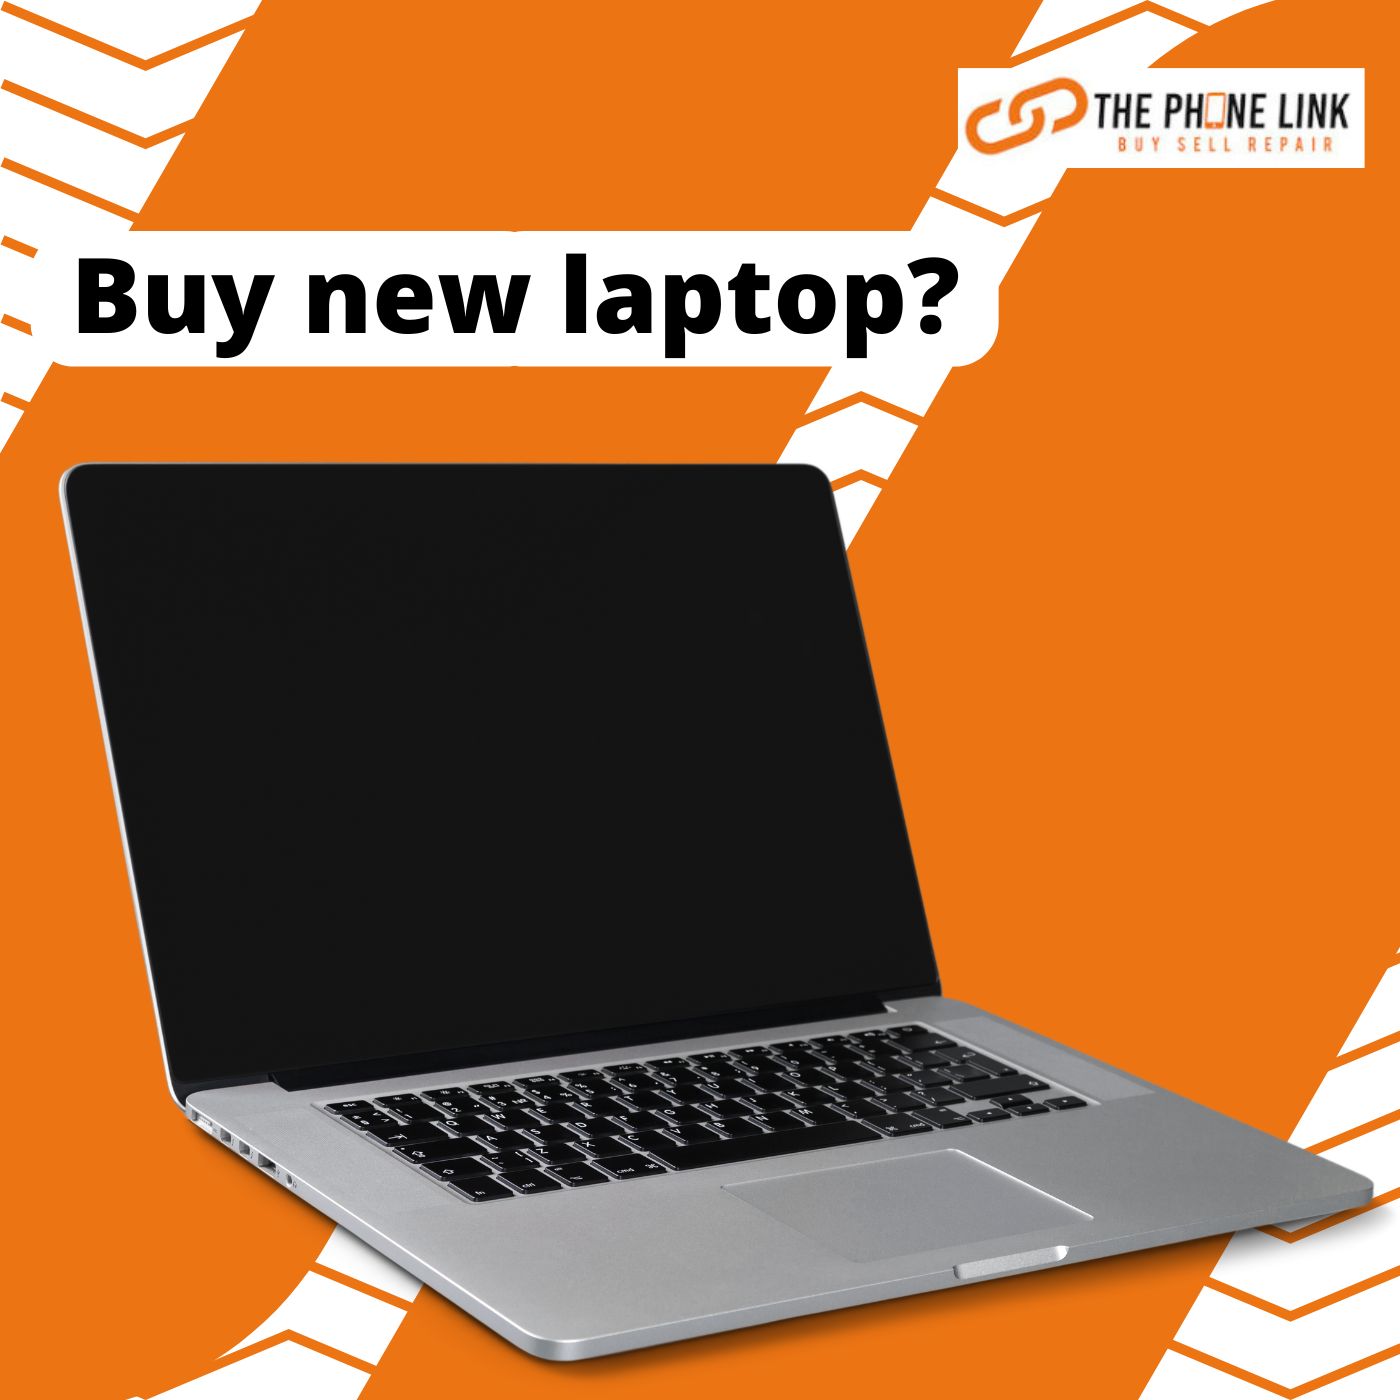 Graduated and Need to Buy a New Laptop? Here’s What to Look For